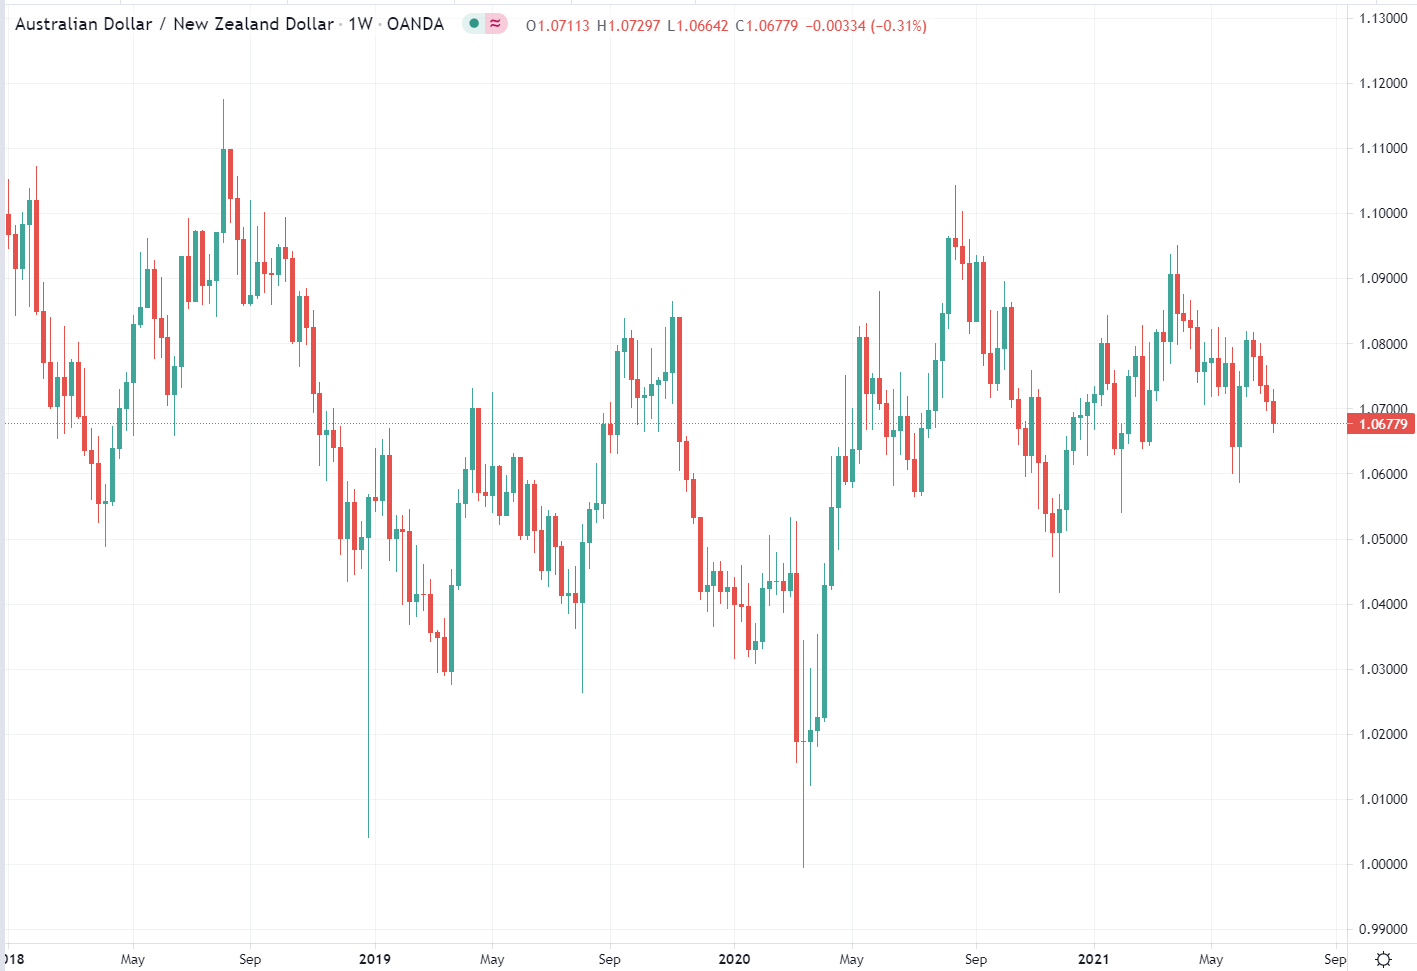 AUD/NZD weekly candlestick chart